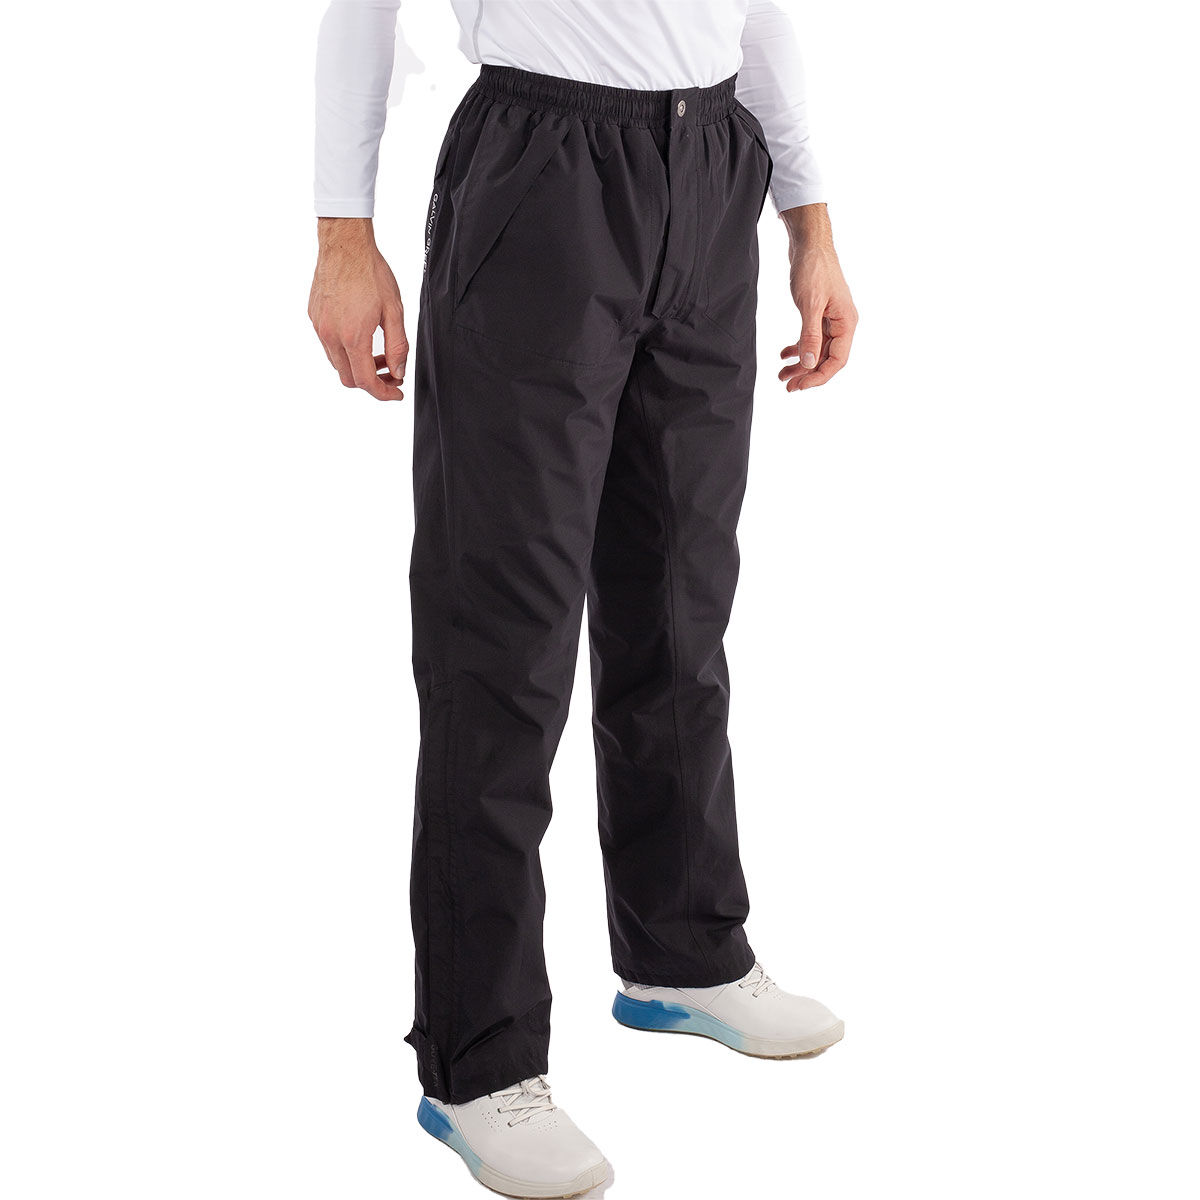 Galvin Green Mens Black Lightweight Andy GORE-TEX Waterproof Short Fit Golf Trousers, Size: L | American Golf